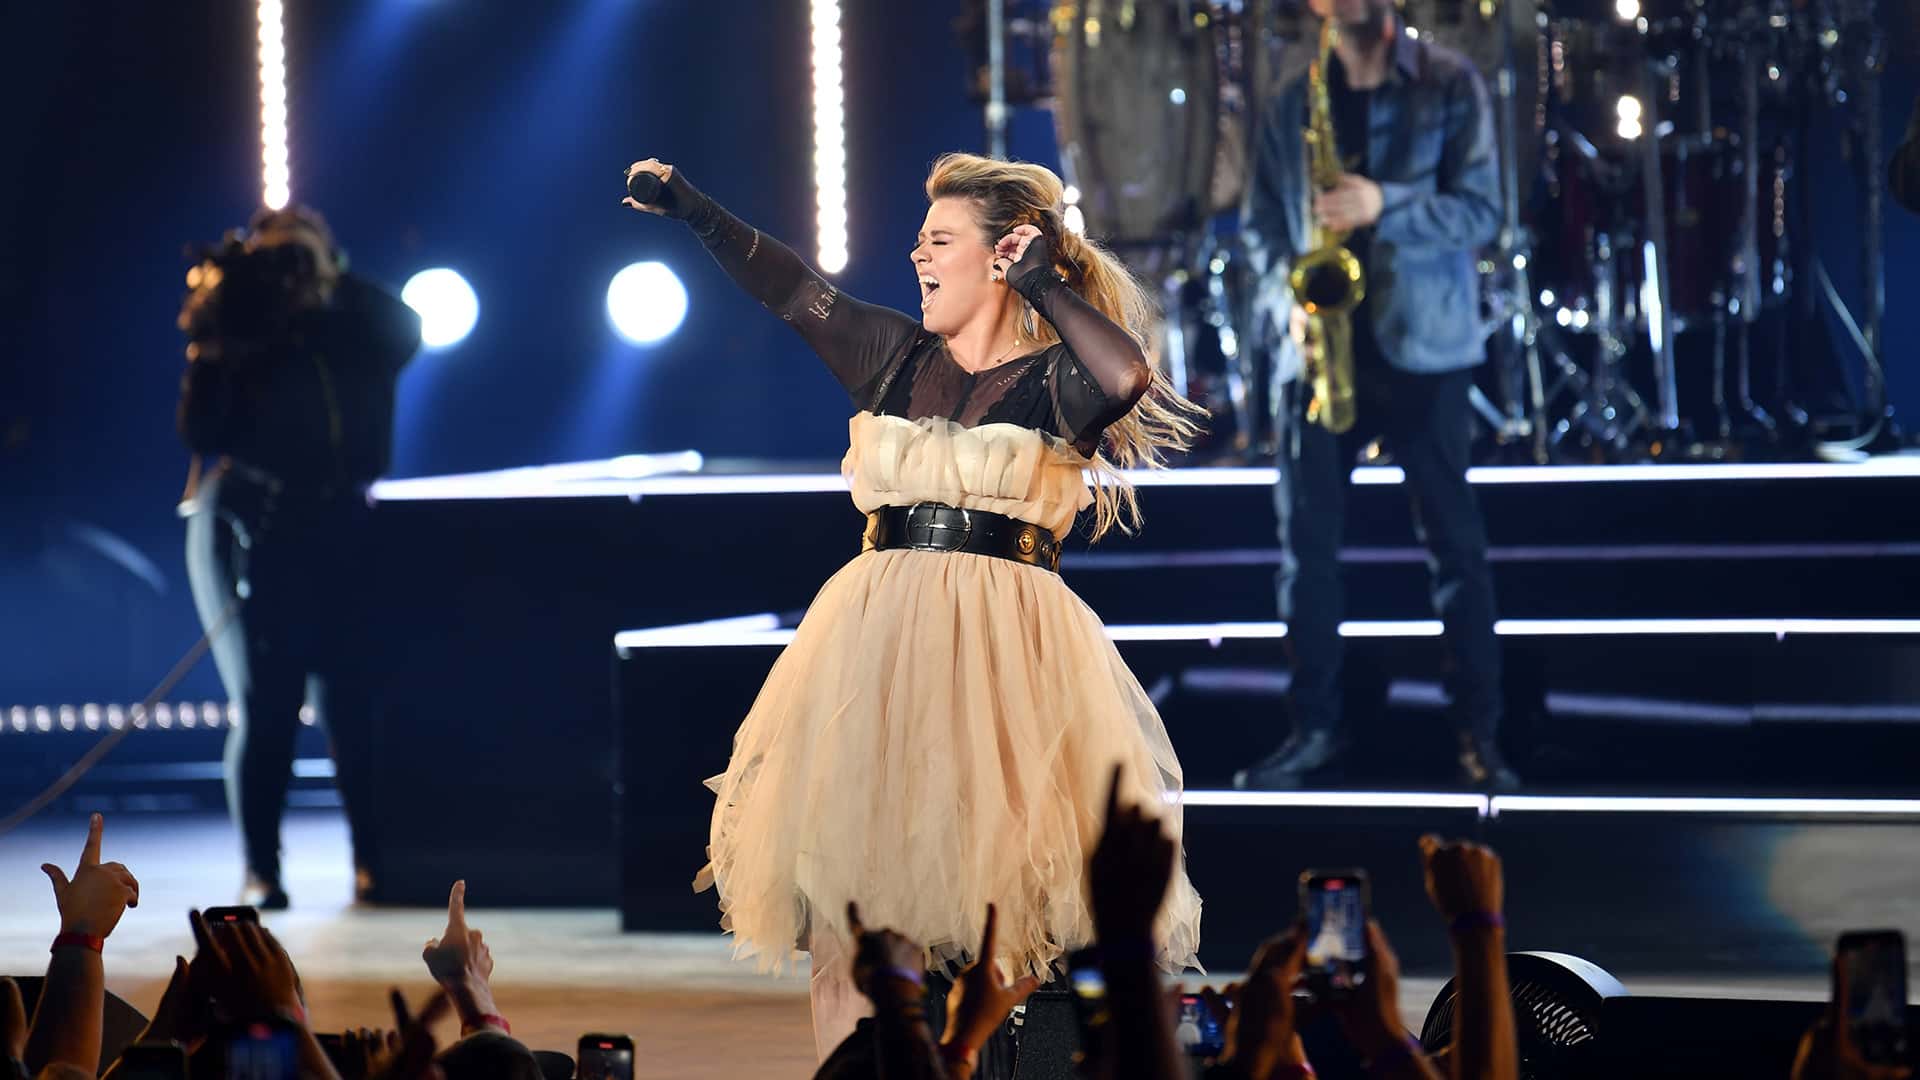 Kelly Clarkson Includes Harry Styles Cover in Career-Spanning Las Vegas Residency Set